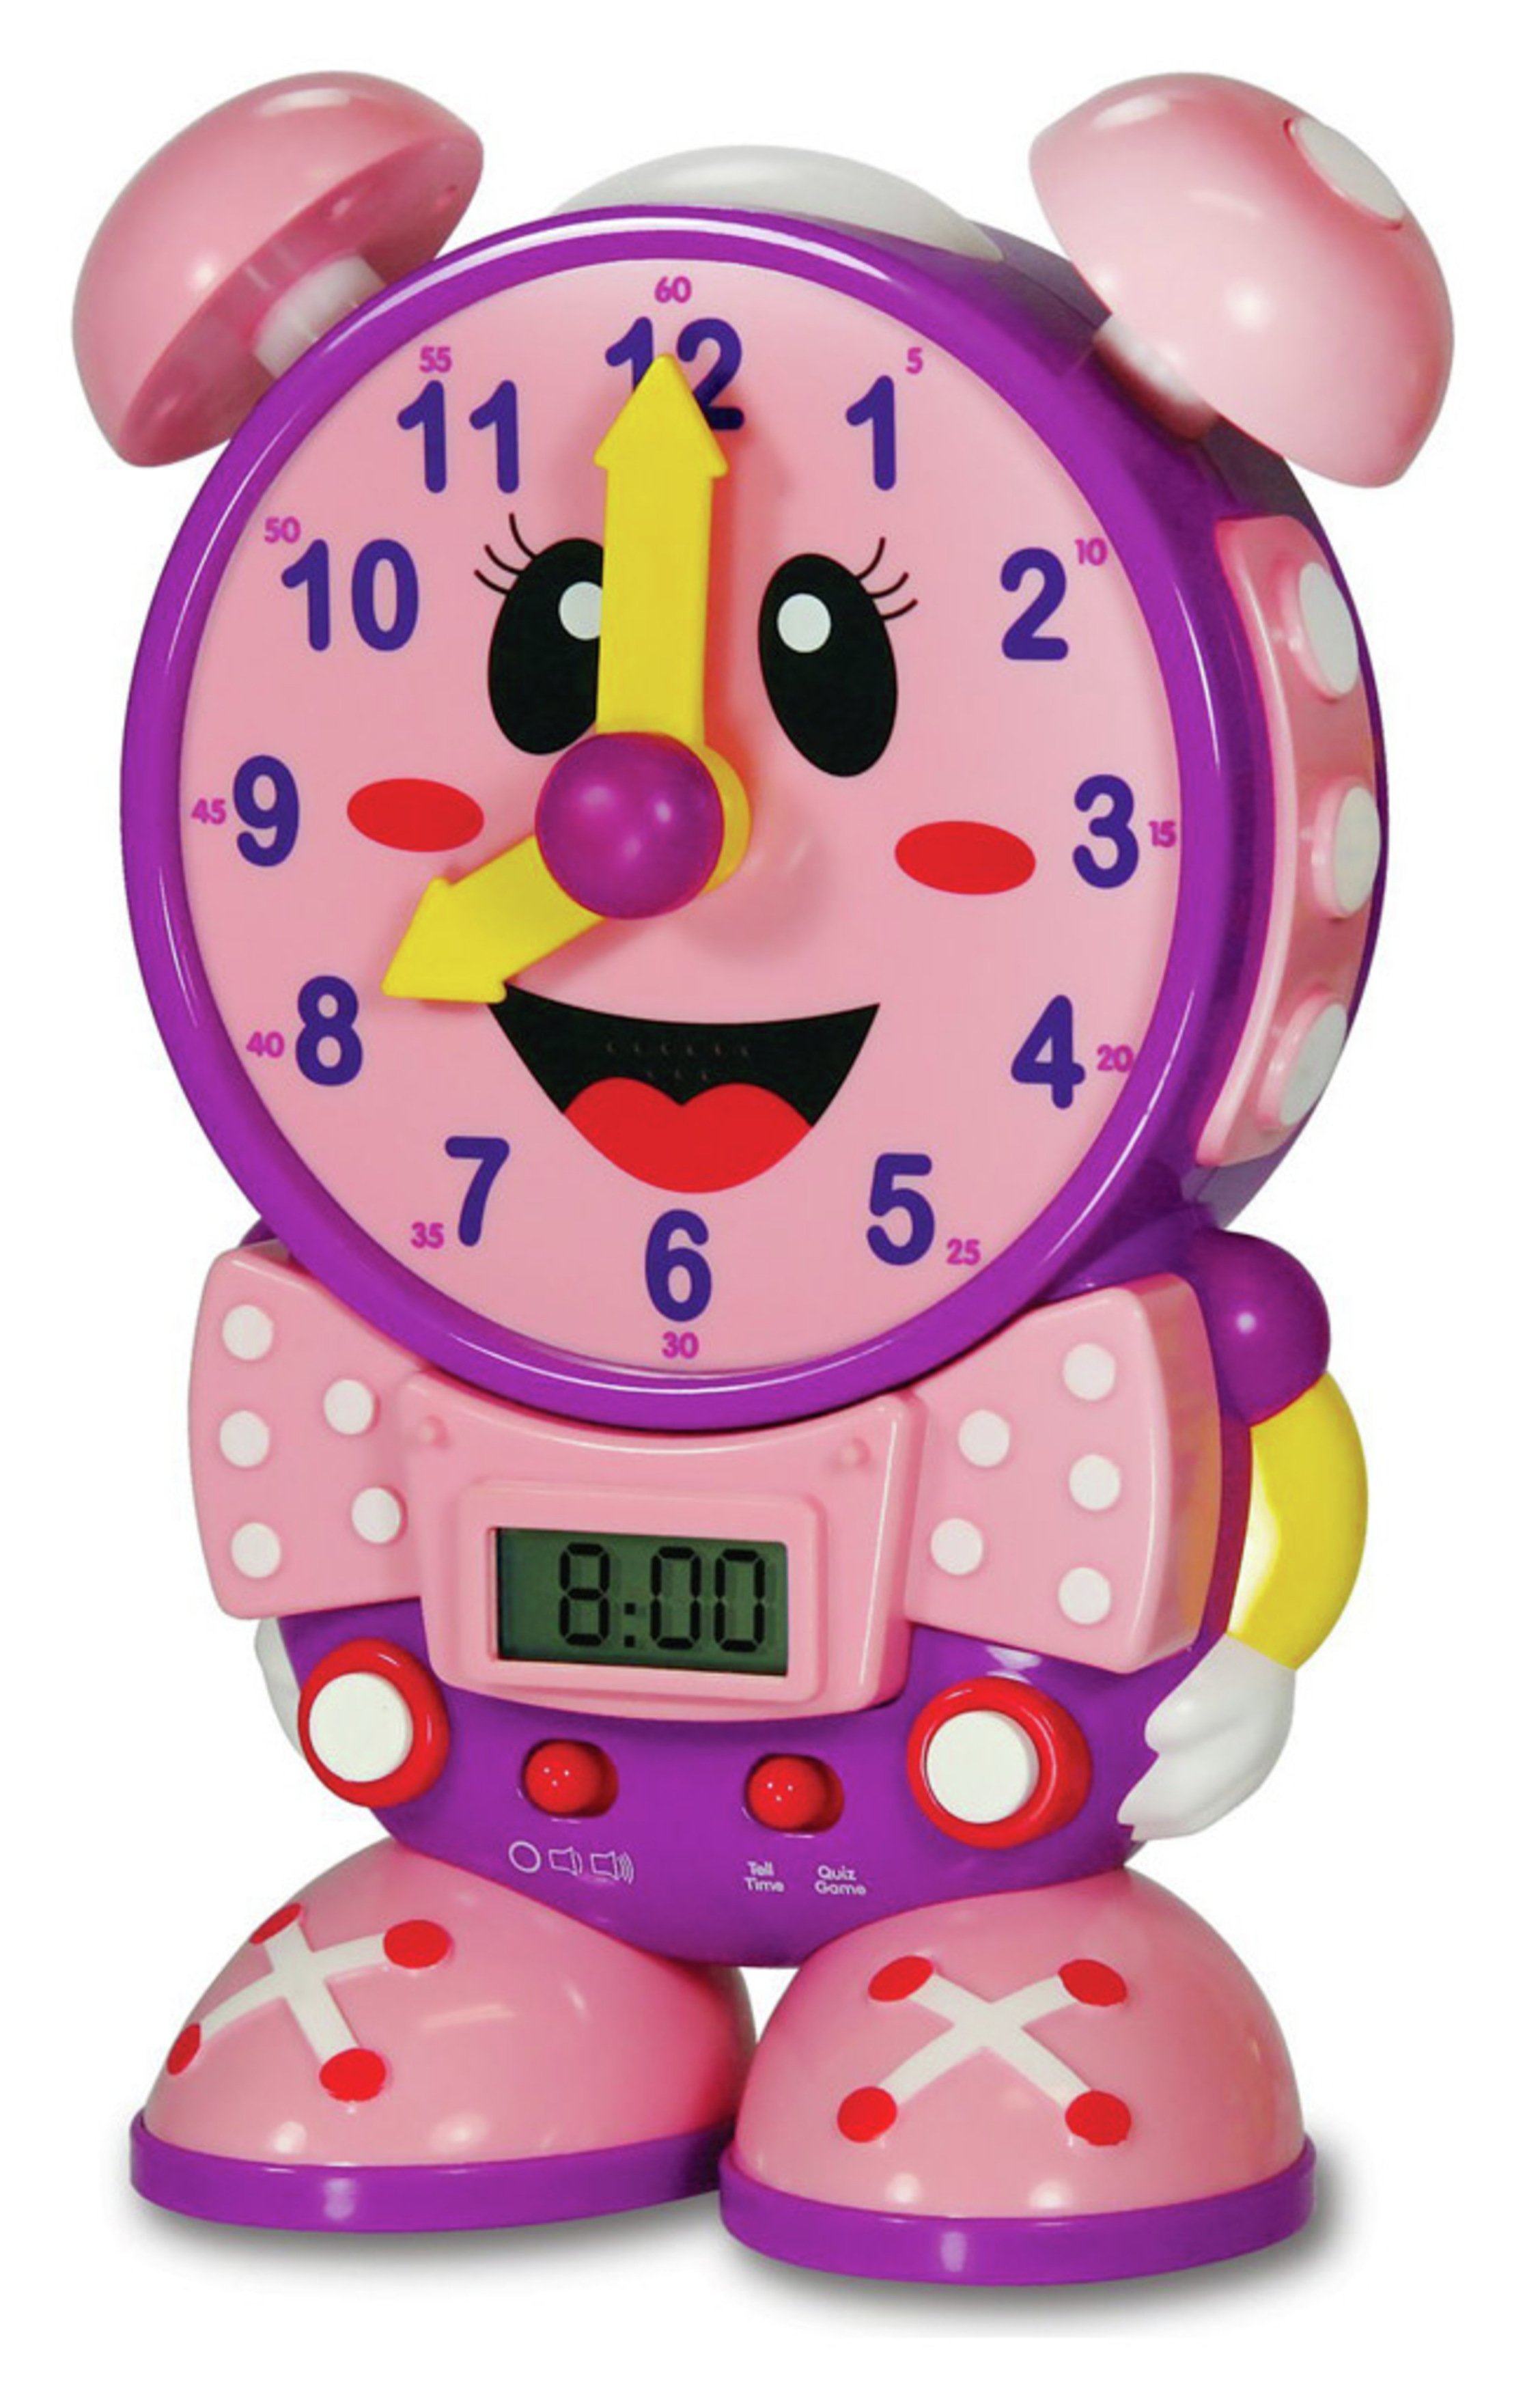 Telly the Teaching Time Clock - Pink